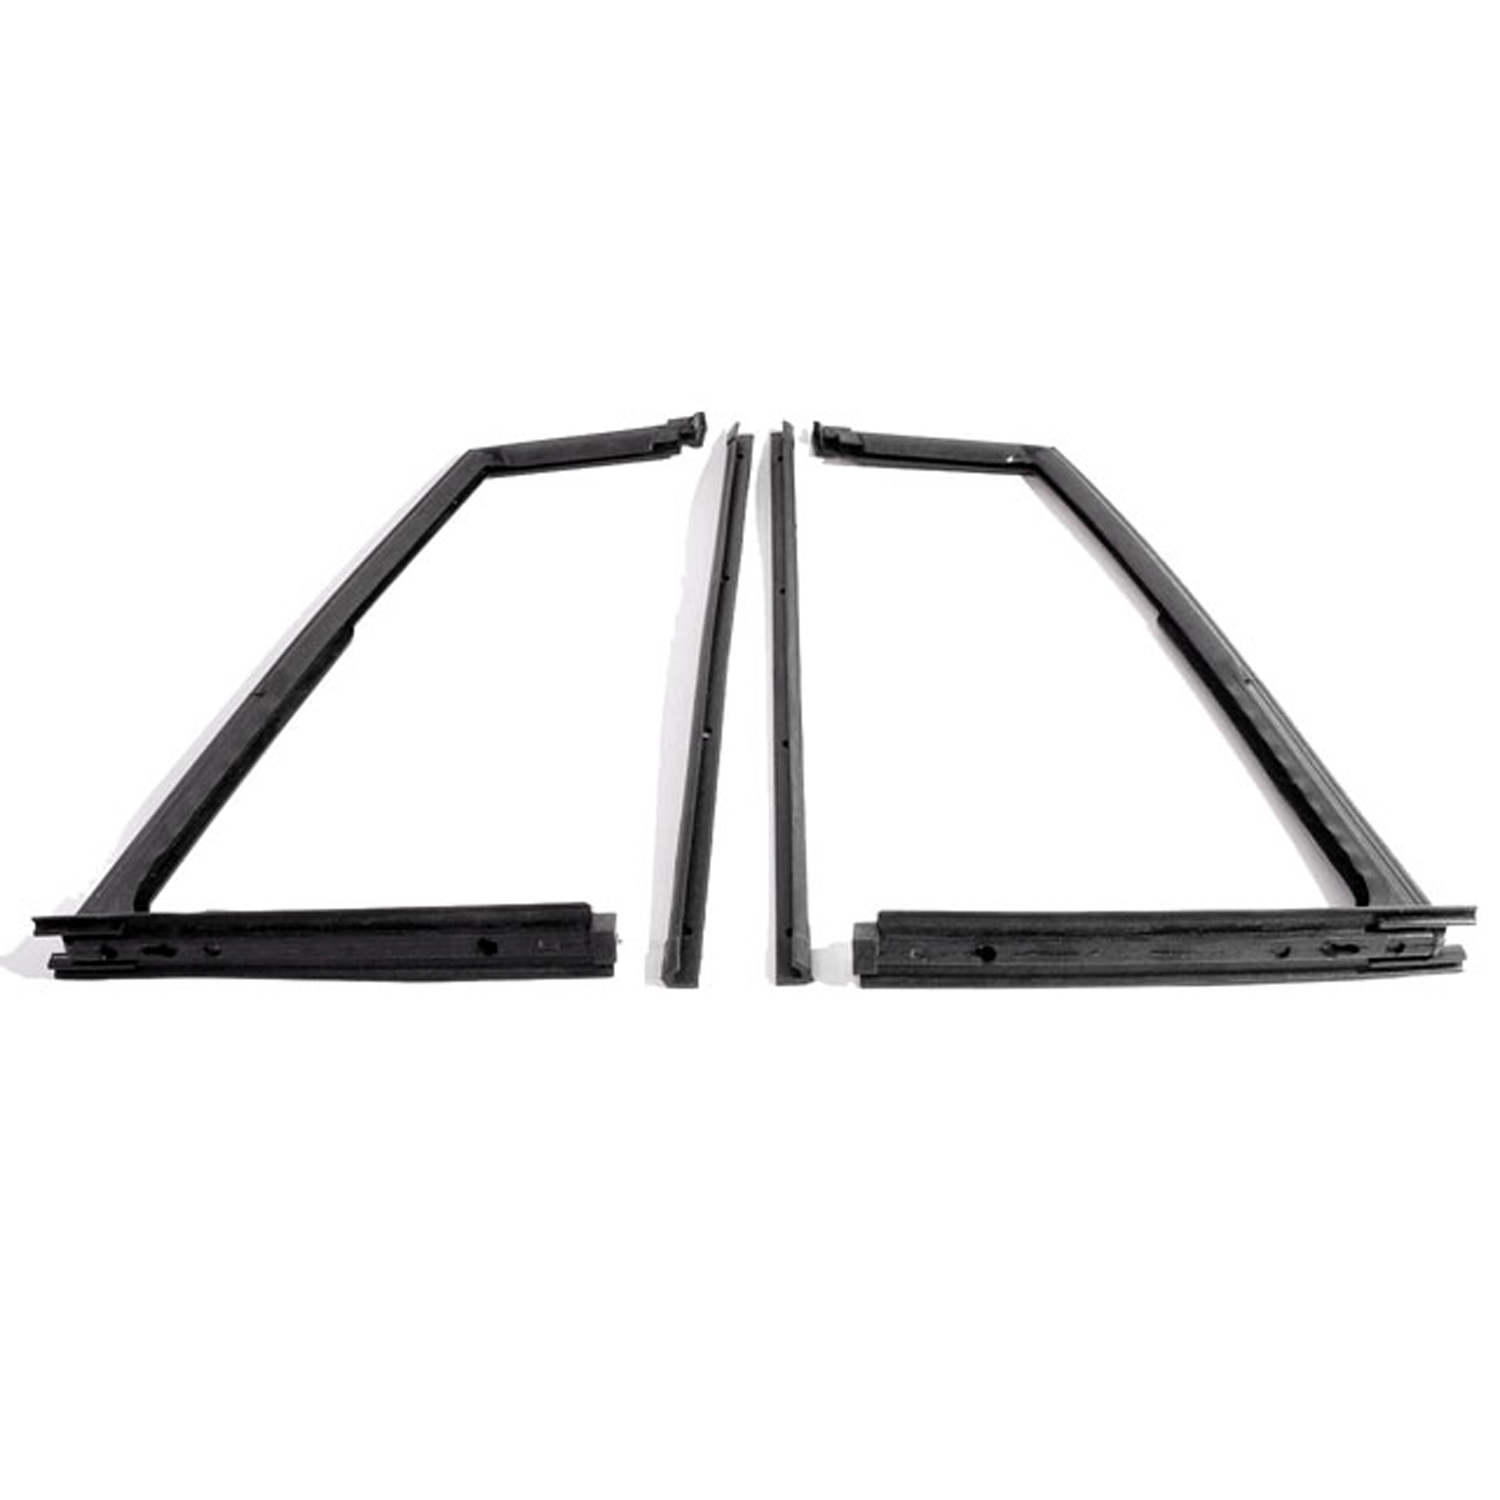 1966 Jeep Jeepster Vent Window Seals.  Pair-WR 9700